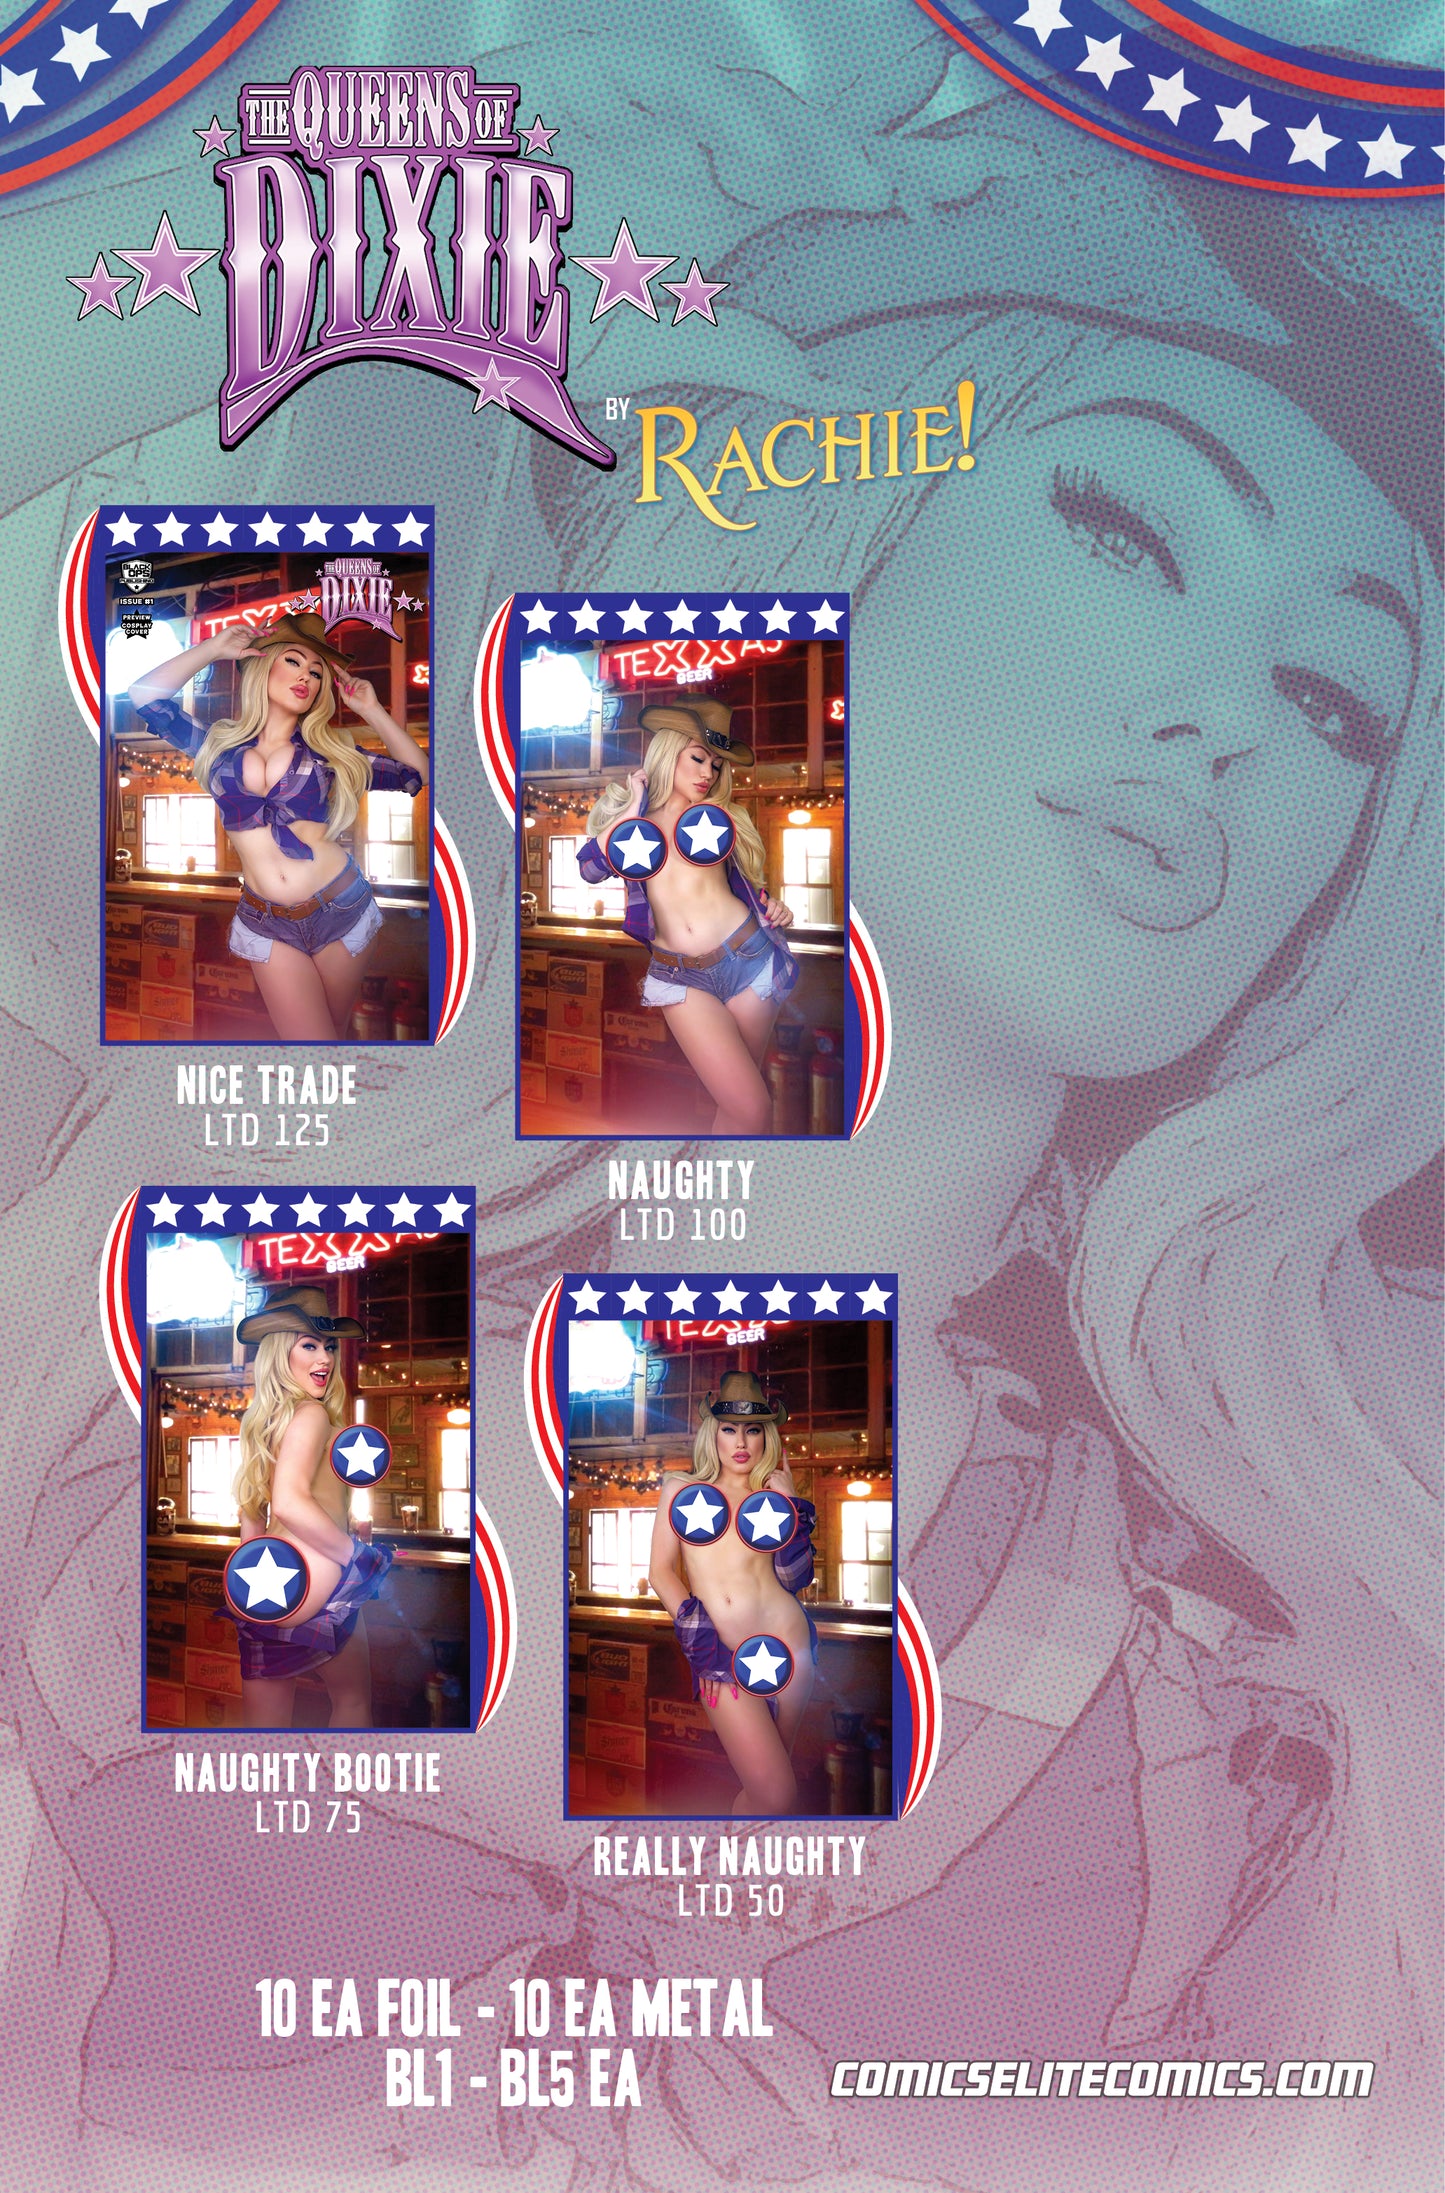 QUEENS OF DIXIE #1 PREVIEW - FACES BY RACHIE - NAUGHTY METAL LTD 10